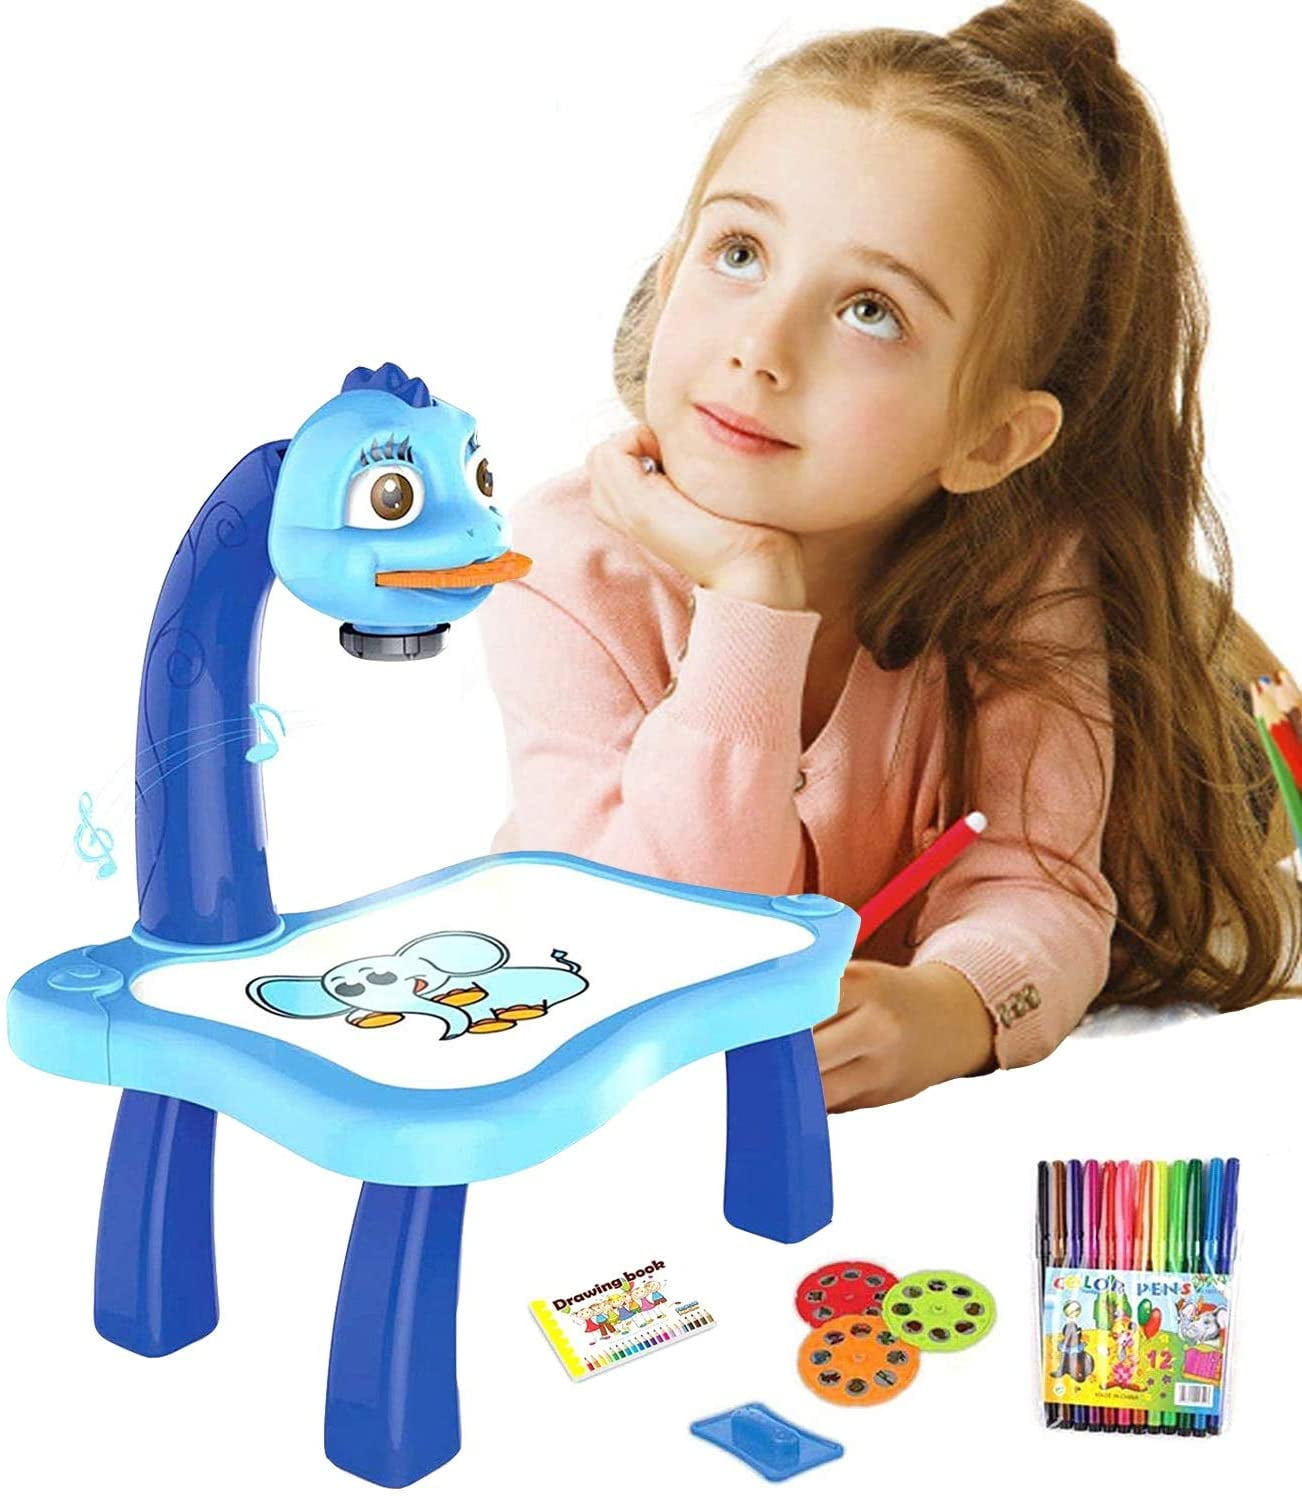 Painting Set Child Learning Desk with Smart Projector with Light Music Early Education Toys Craft Gift for Kids Childrens Haohon Drawing Projector Table for Kids Projector Painting for Kids A